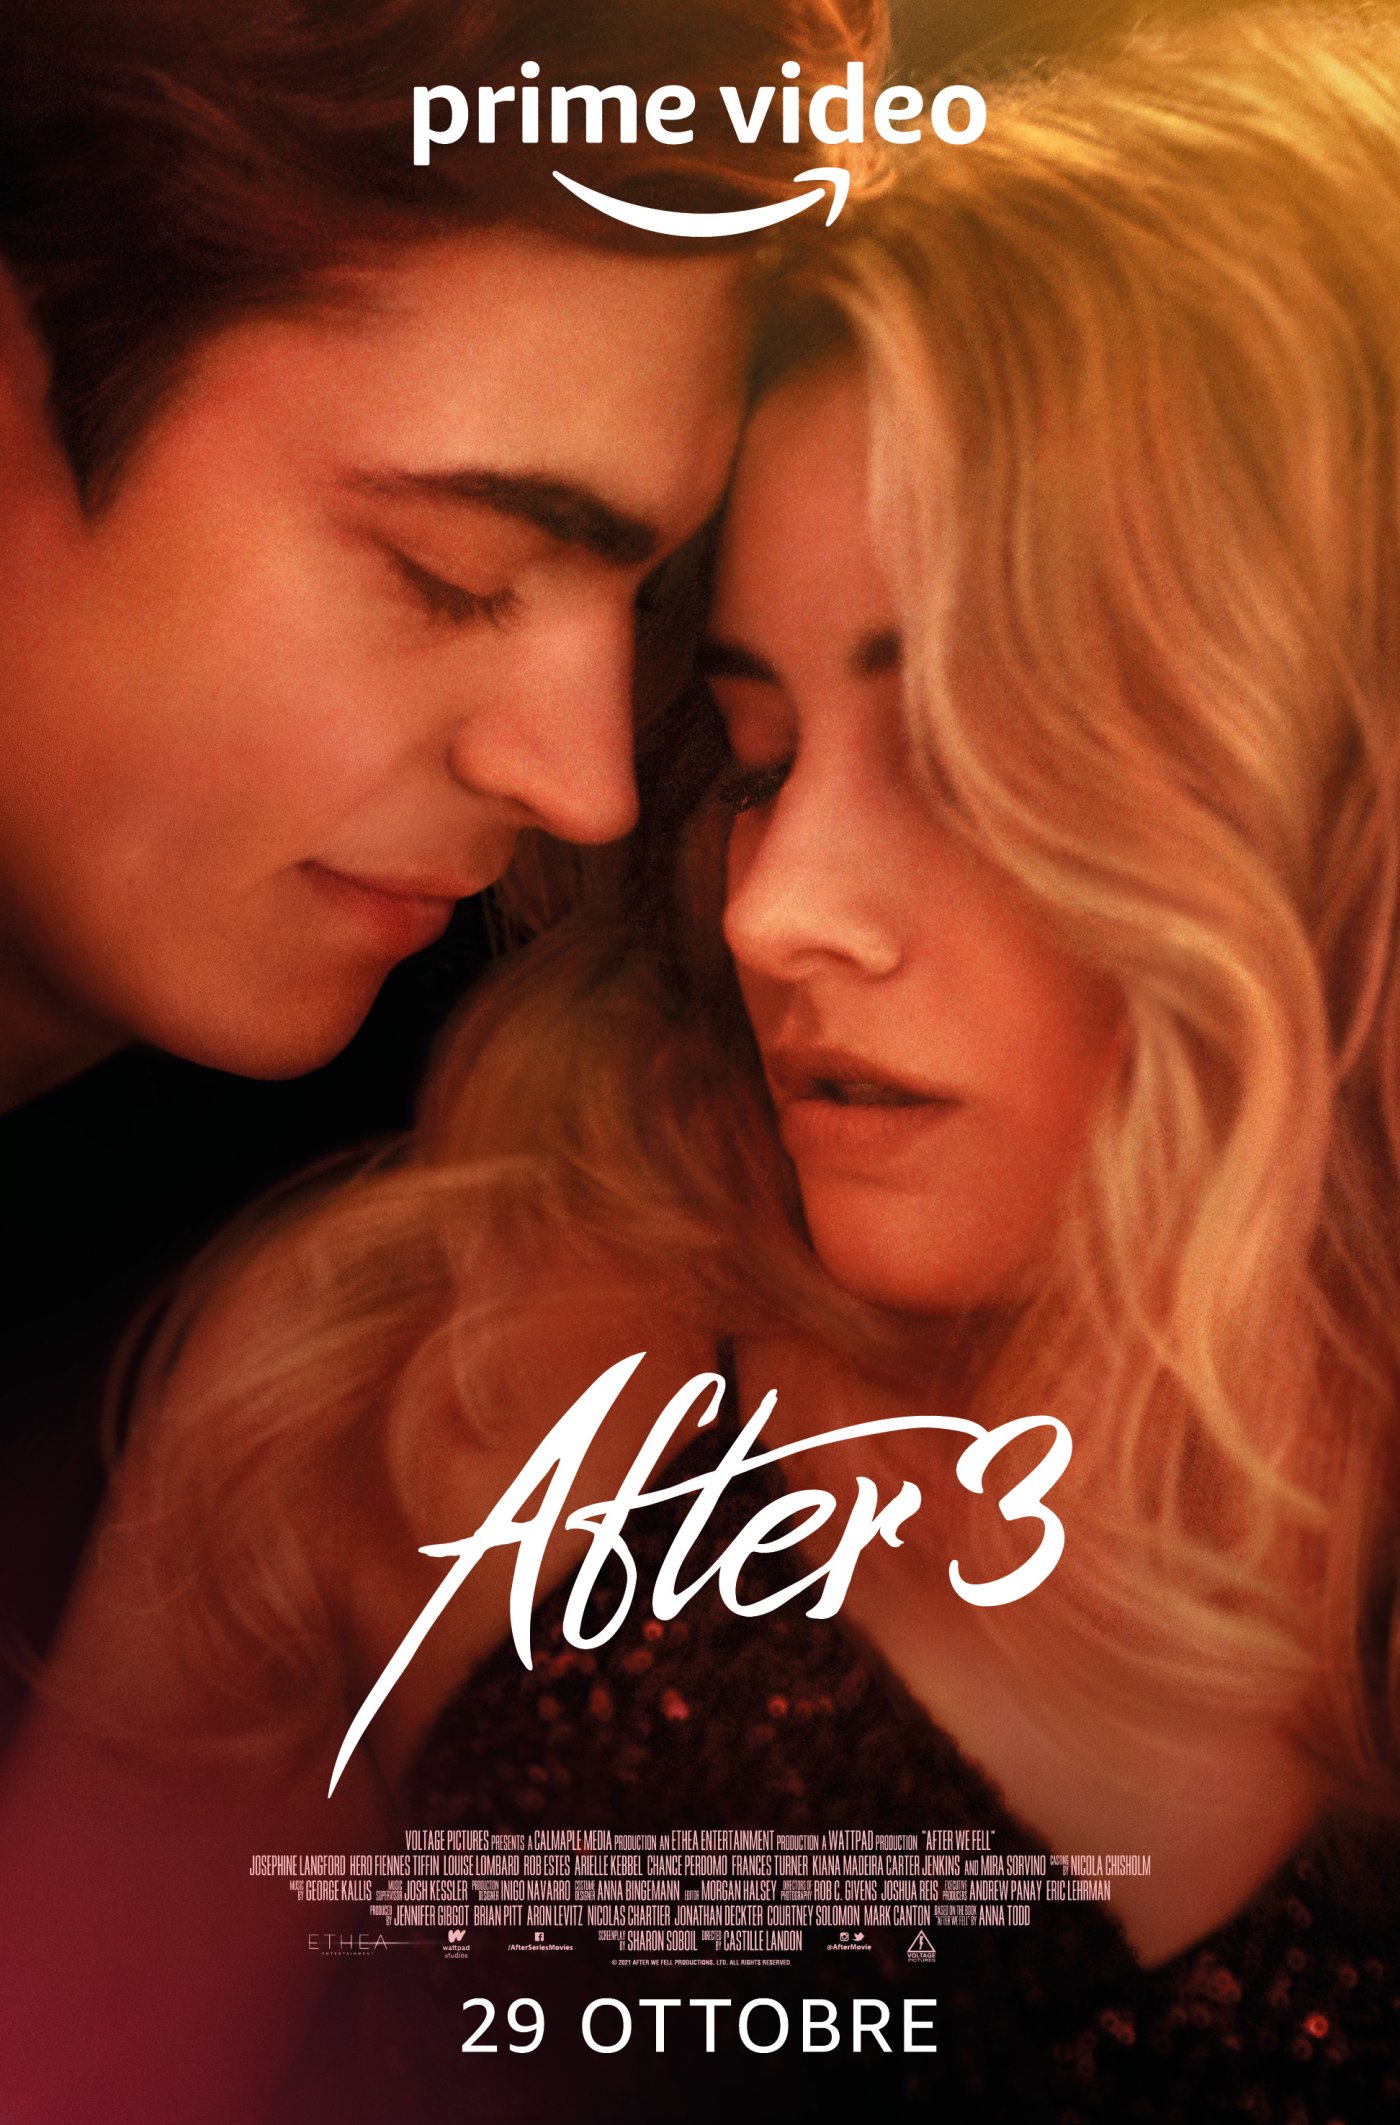 https://movieplayer.it/film/after-3_57069/